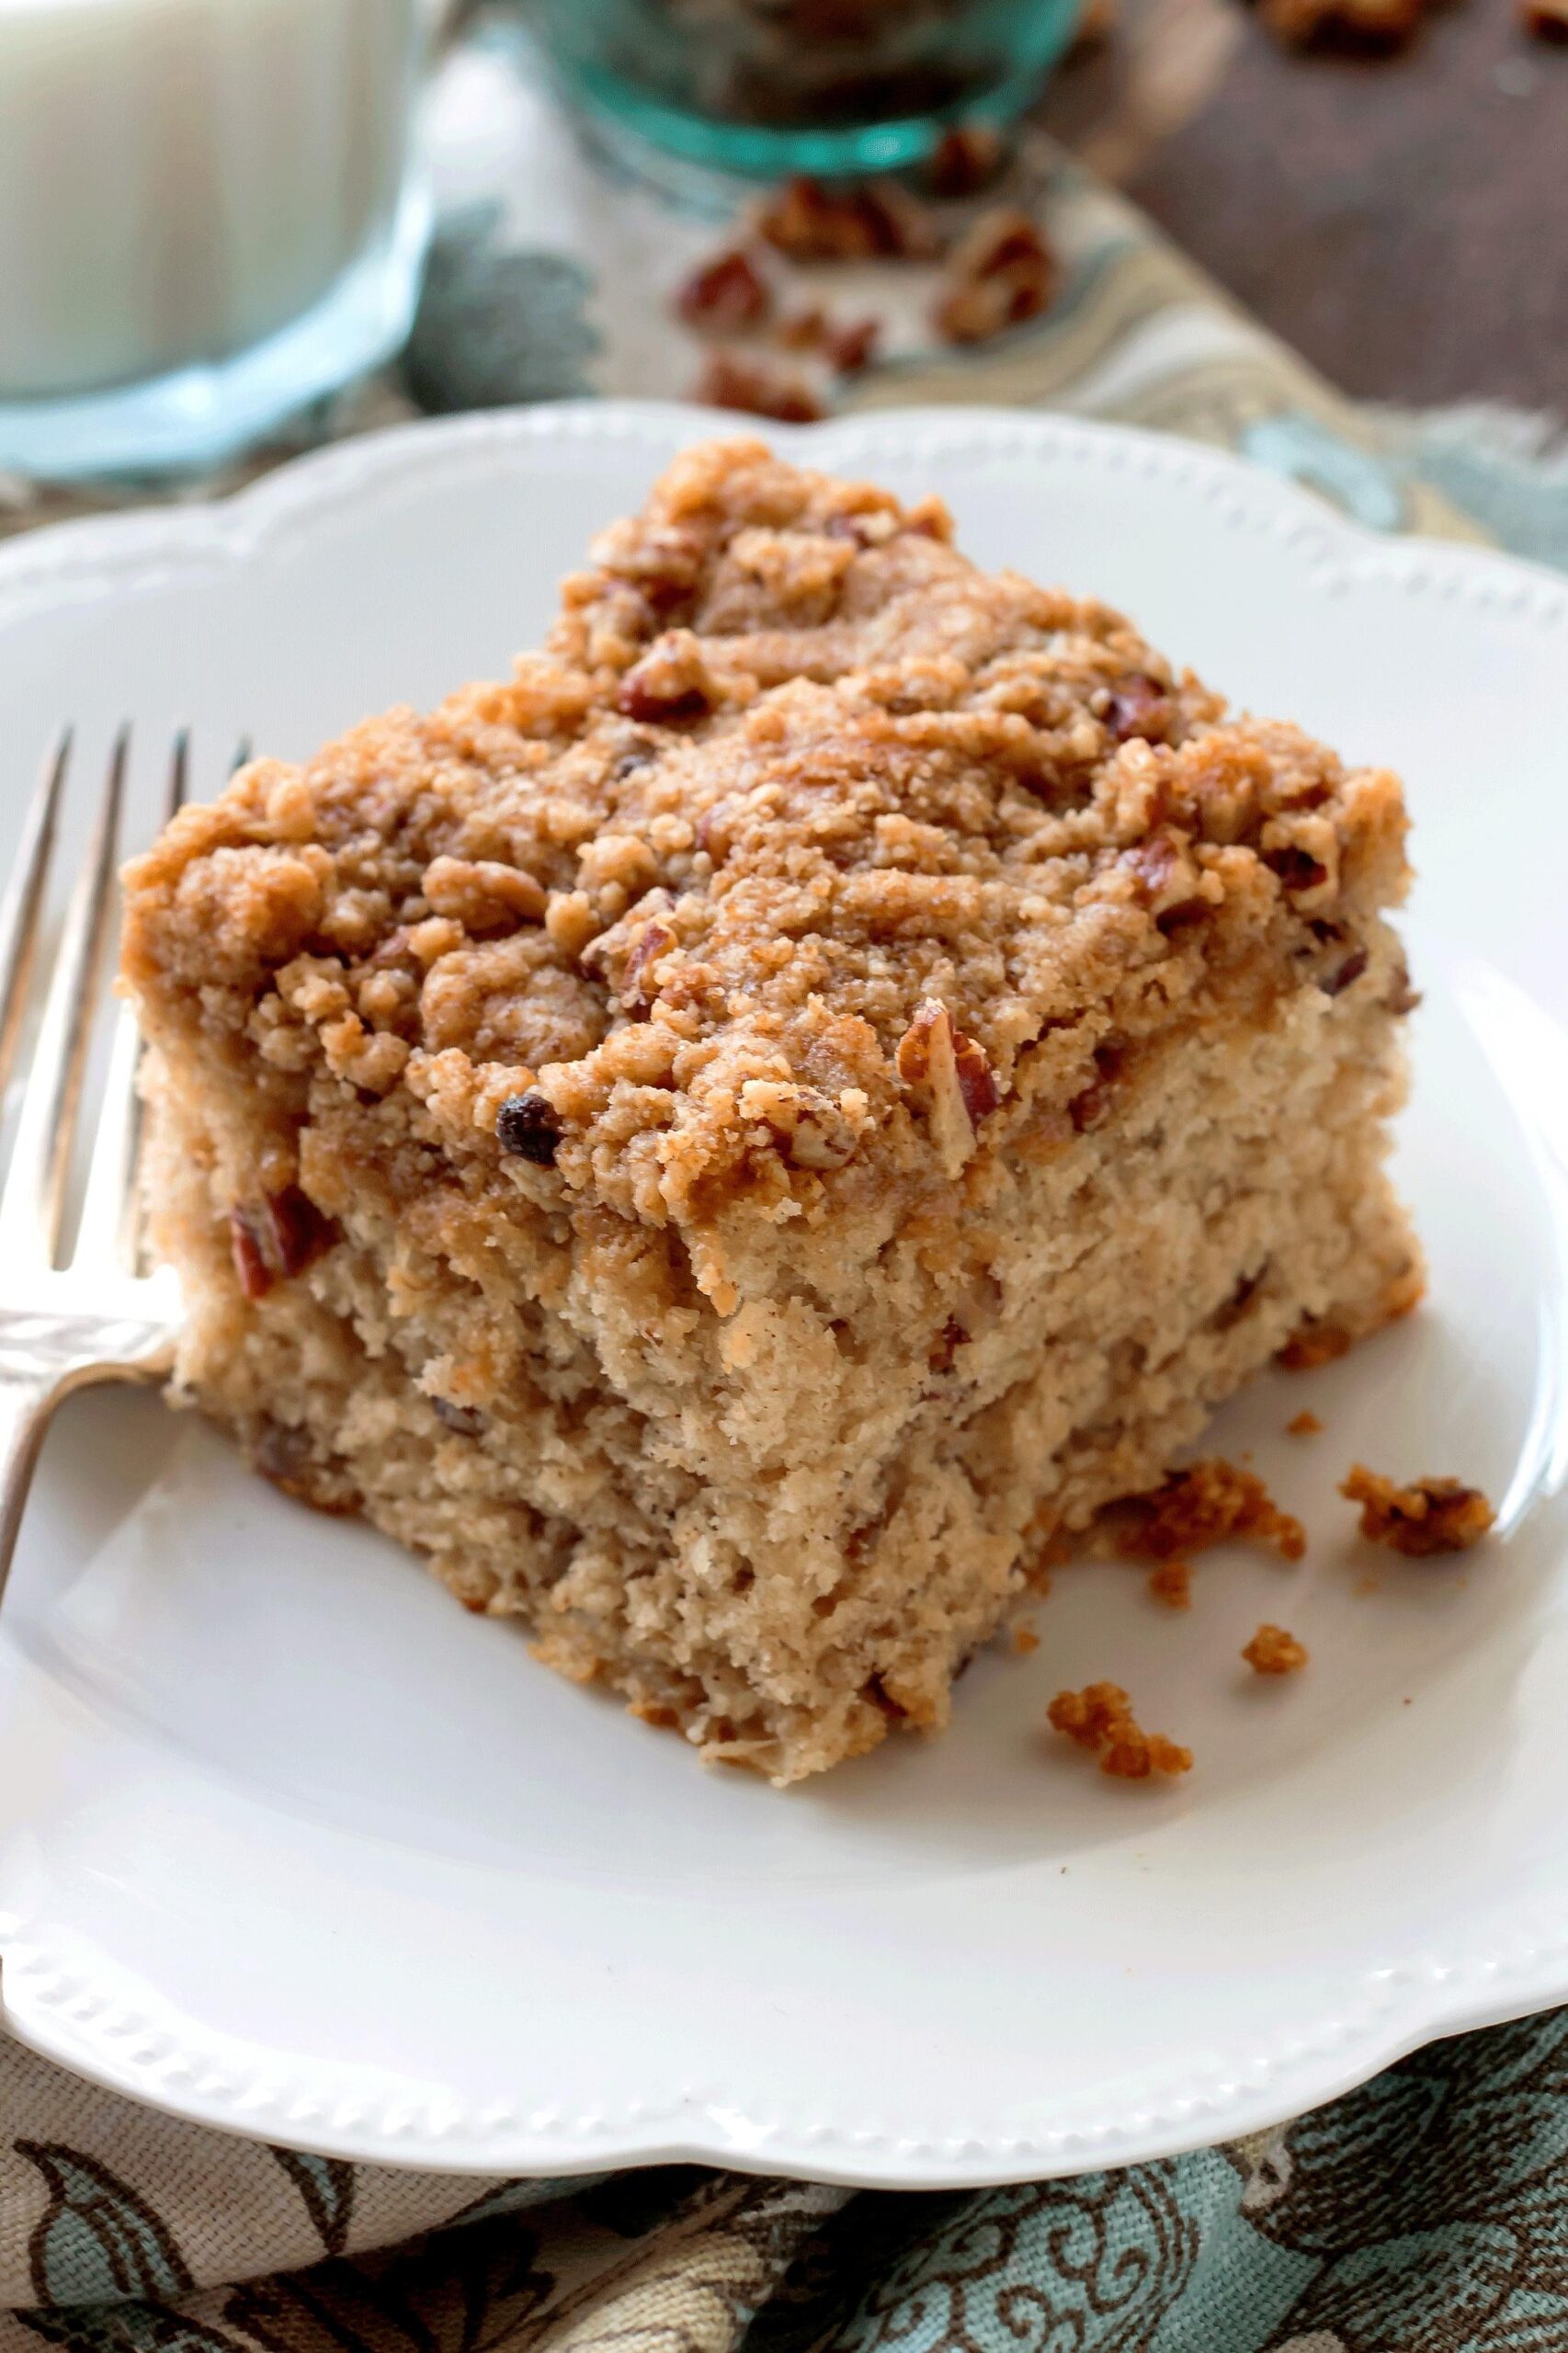  Our coffee cake will make your taste buds sing like a finely tuned orchestra.